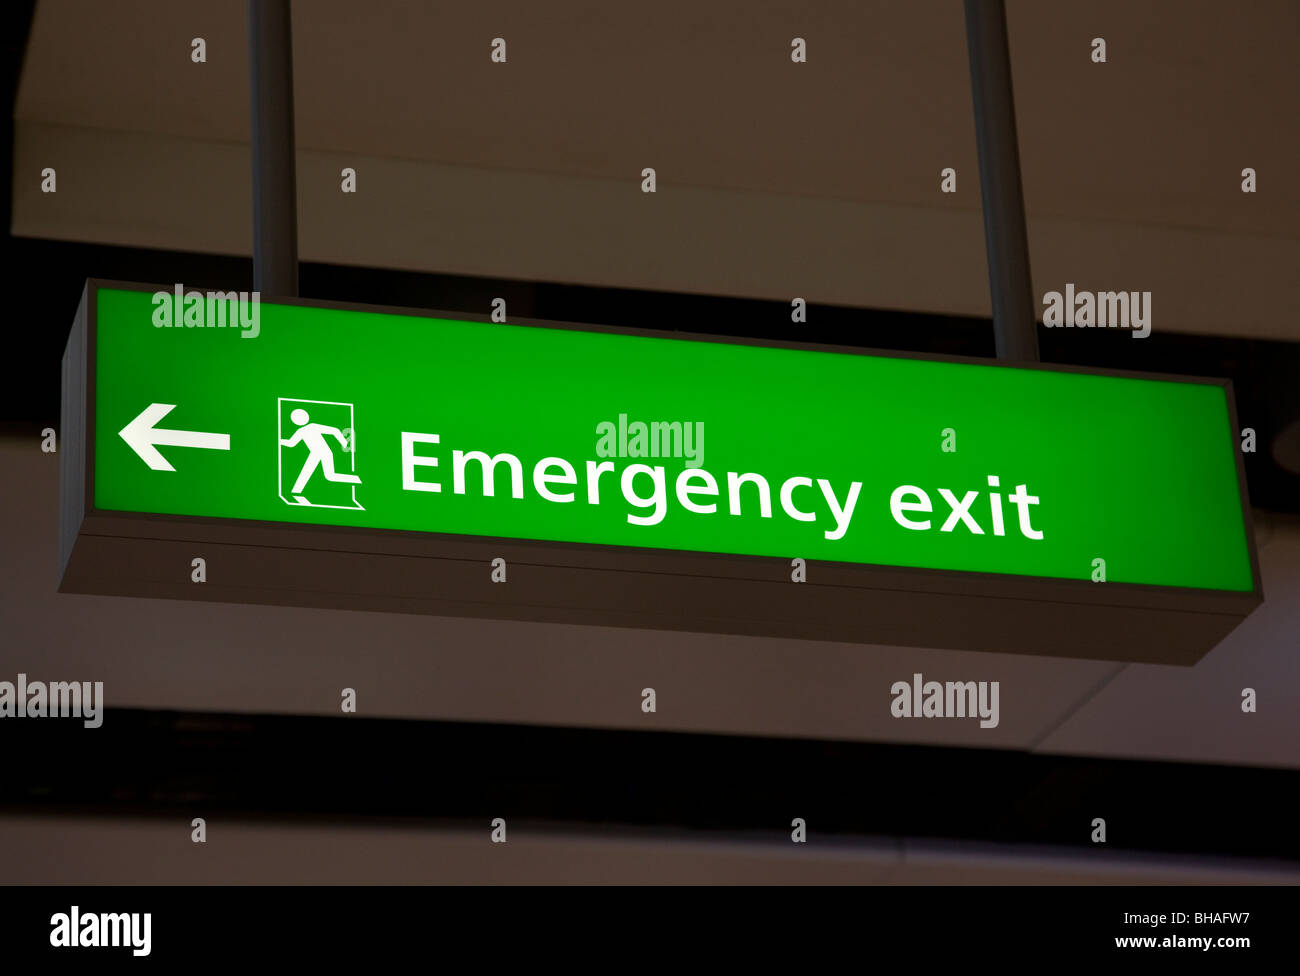 Emergency exit sign at airport, Terminal 5, Heathrow airport, London, England Stock Photo